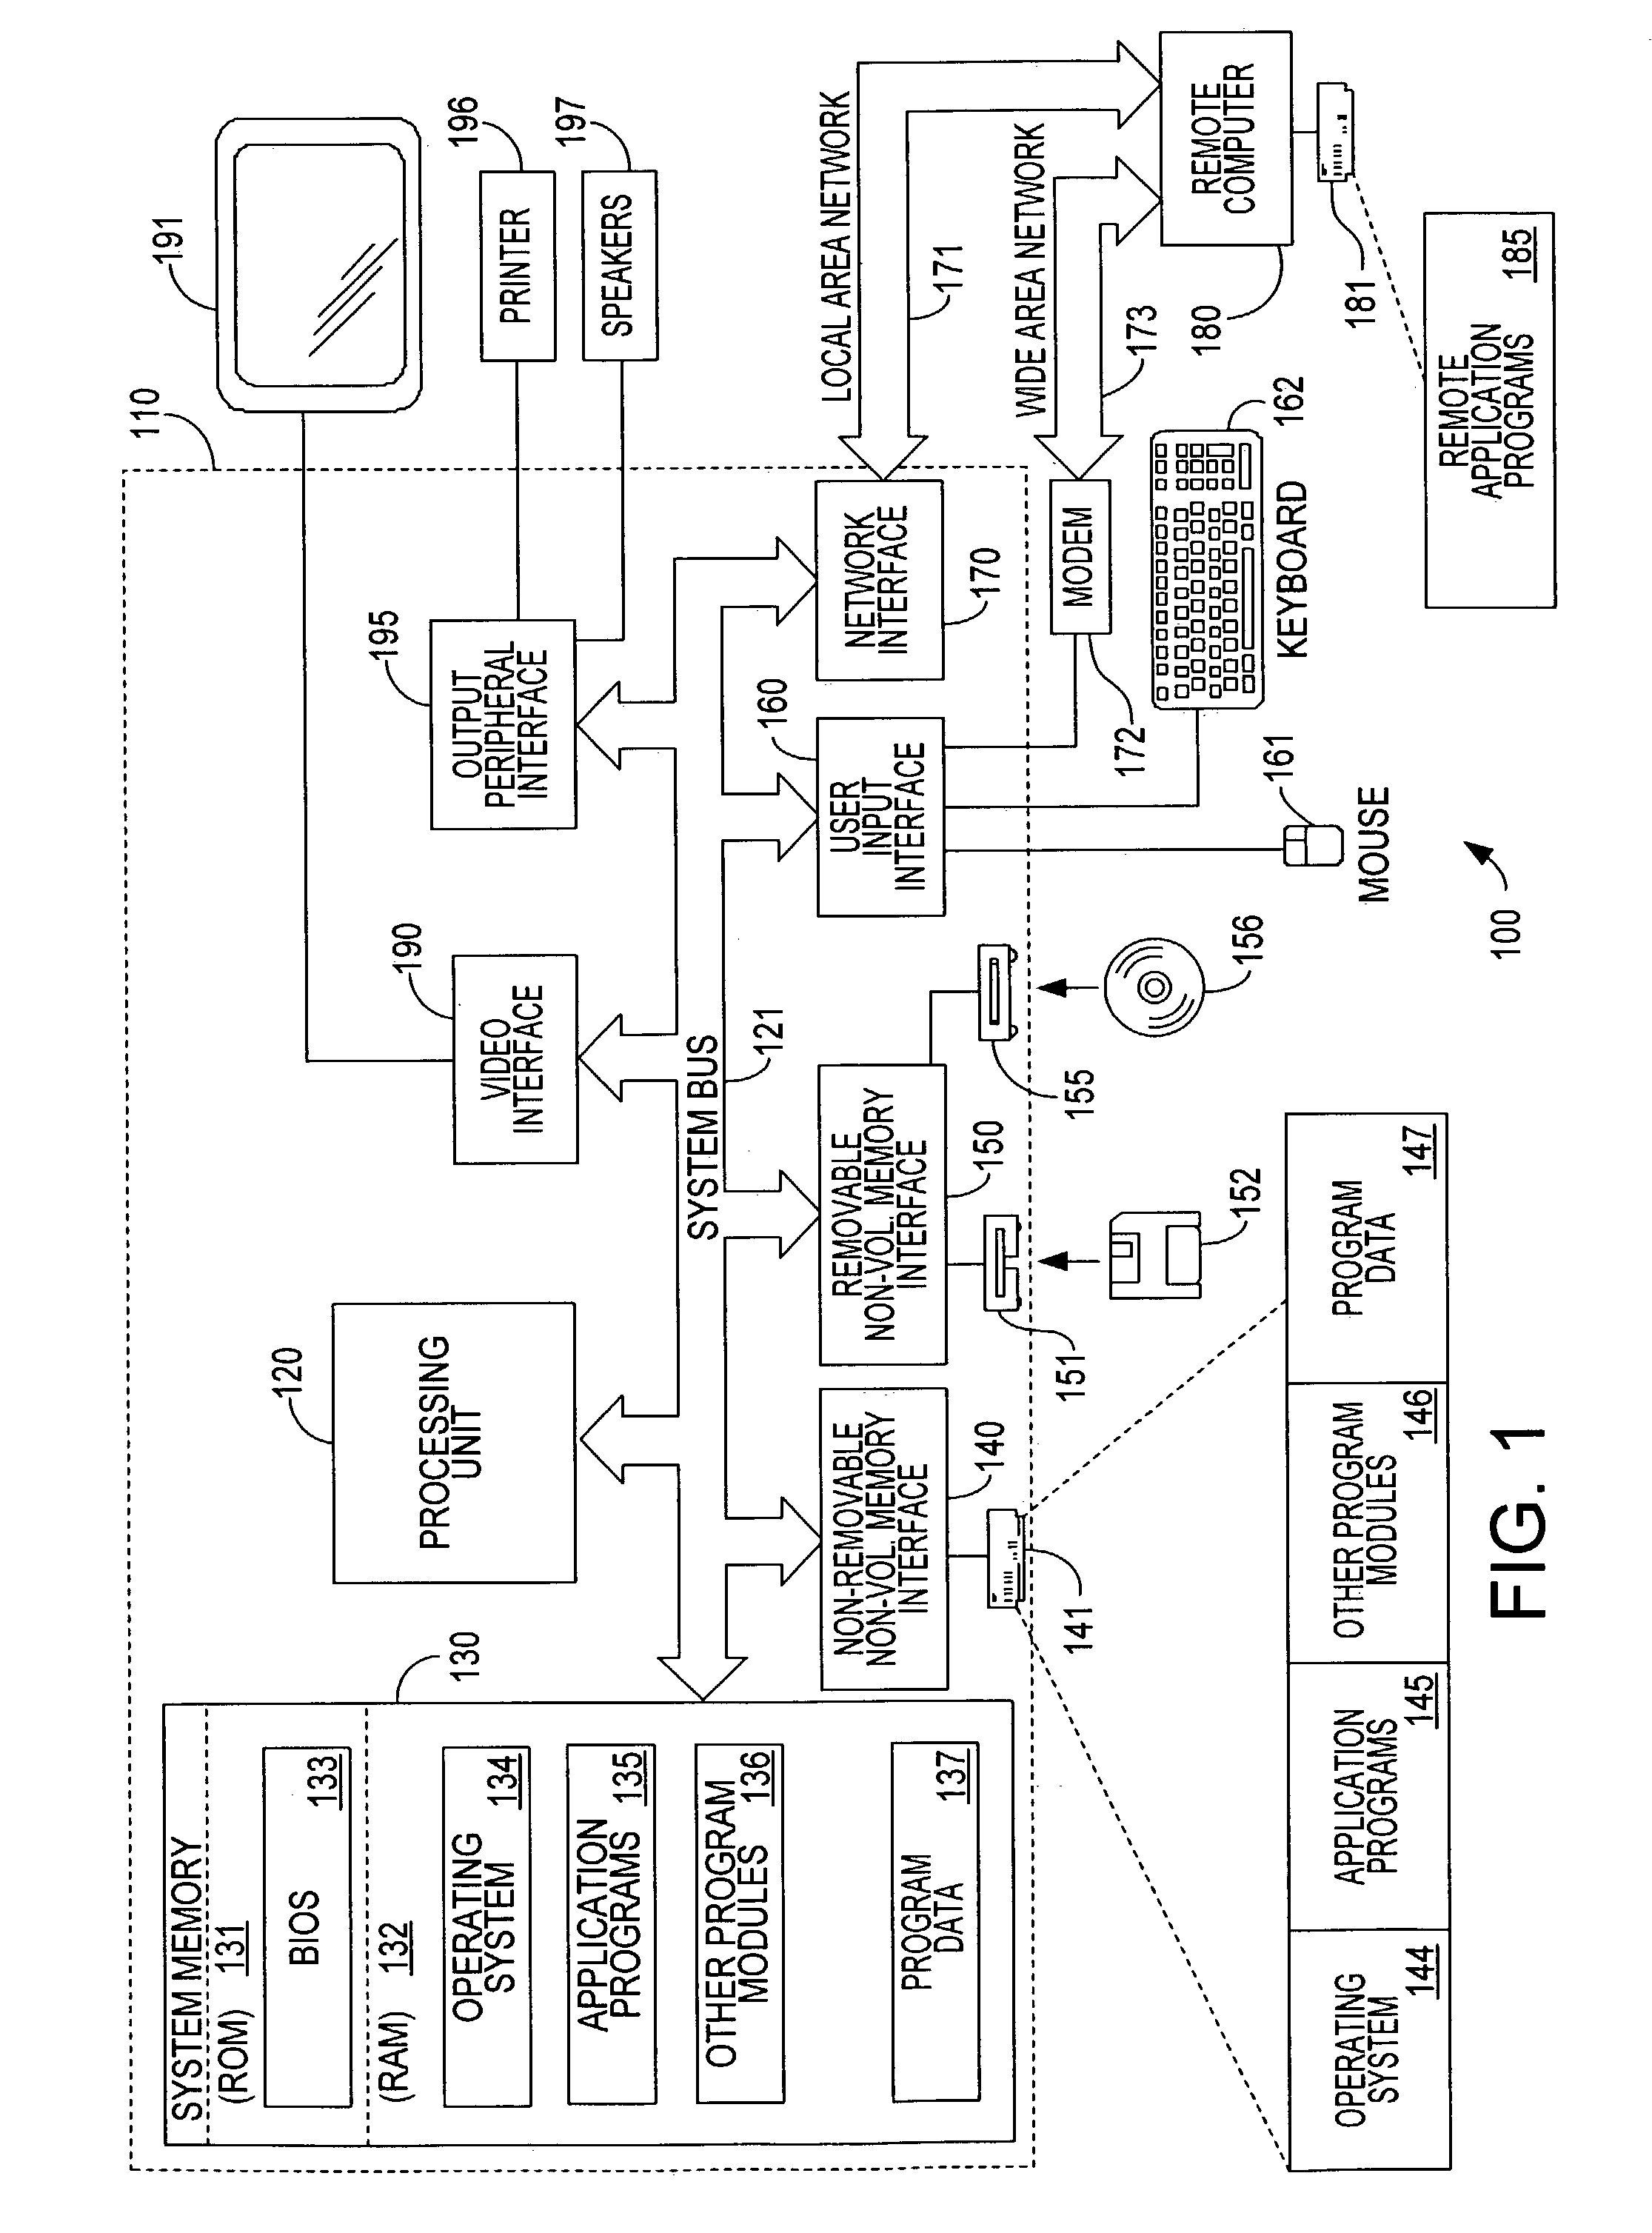 Peer-to-peer name resolution wire protocol and message format data structure for use therein